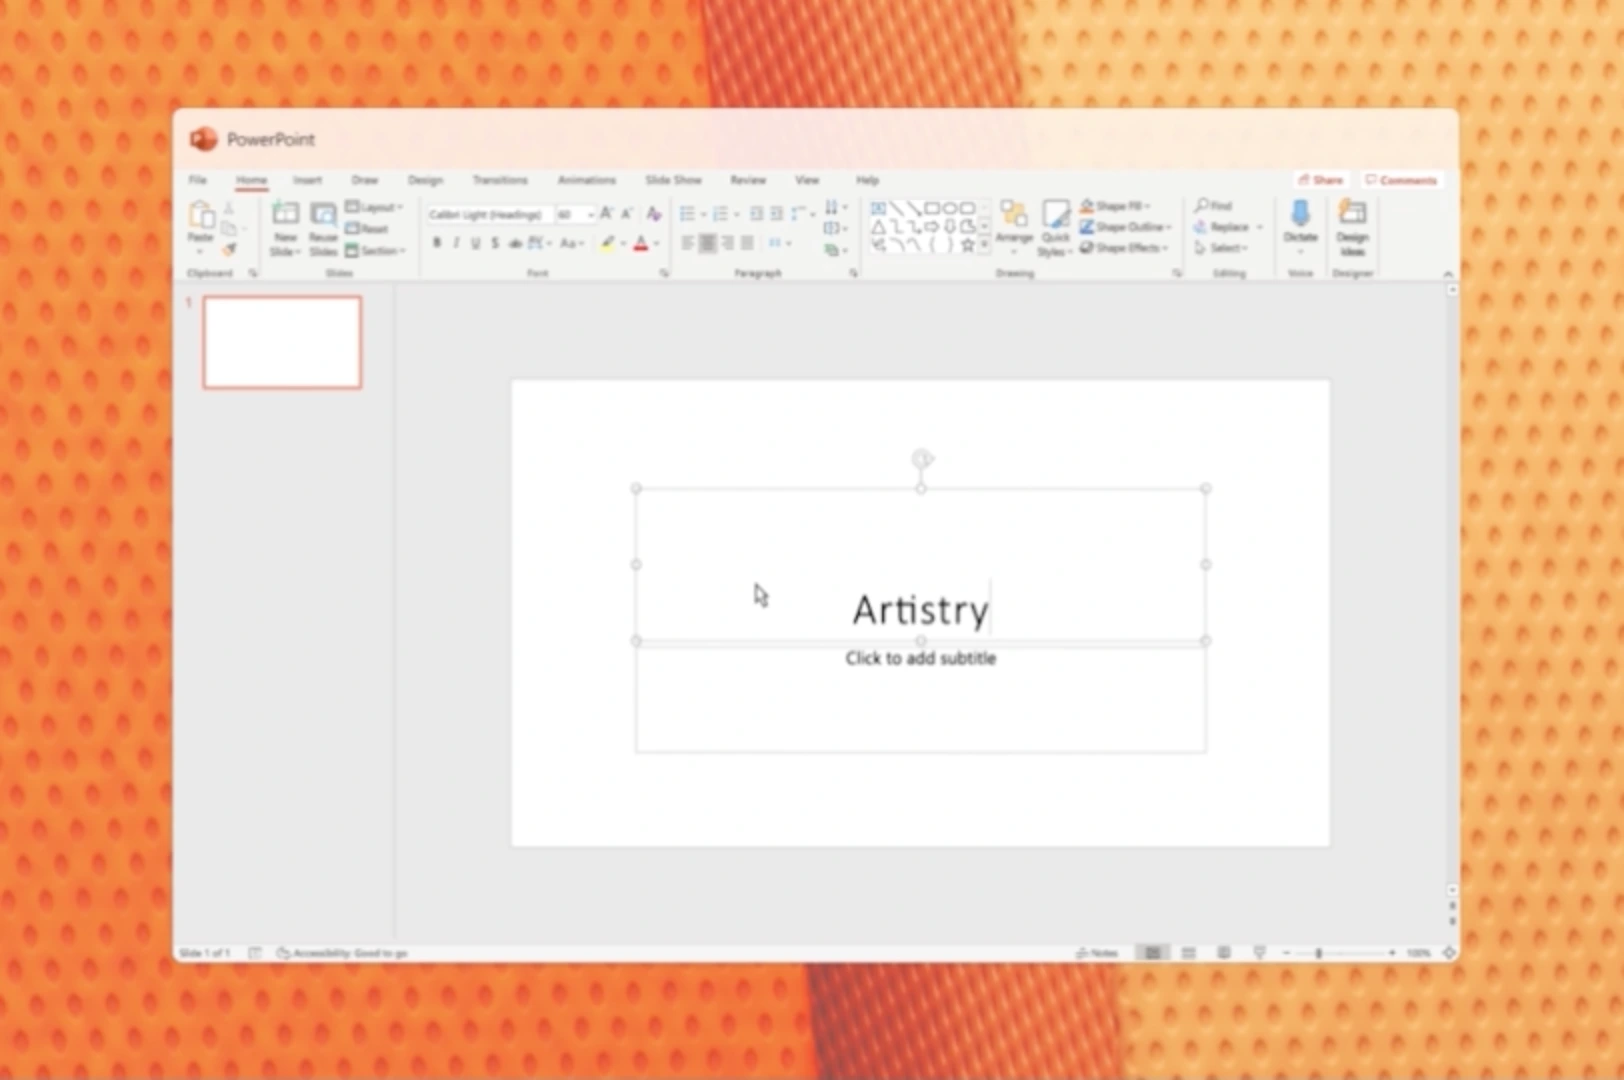 microsoft 365 personal office 365 personal designer do powerpoint mbmti